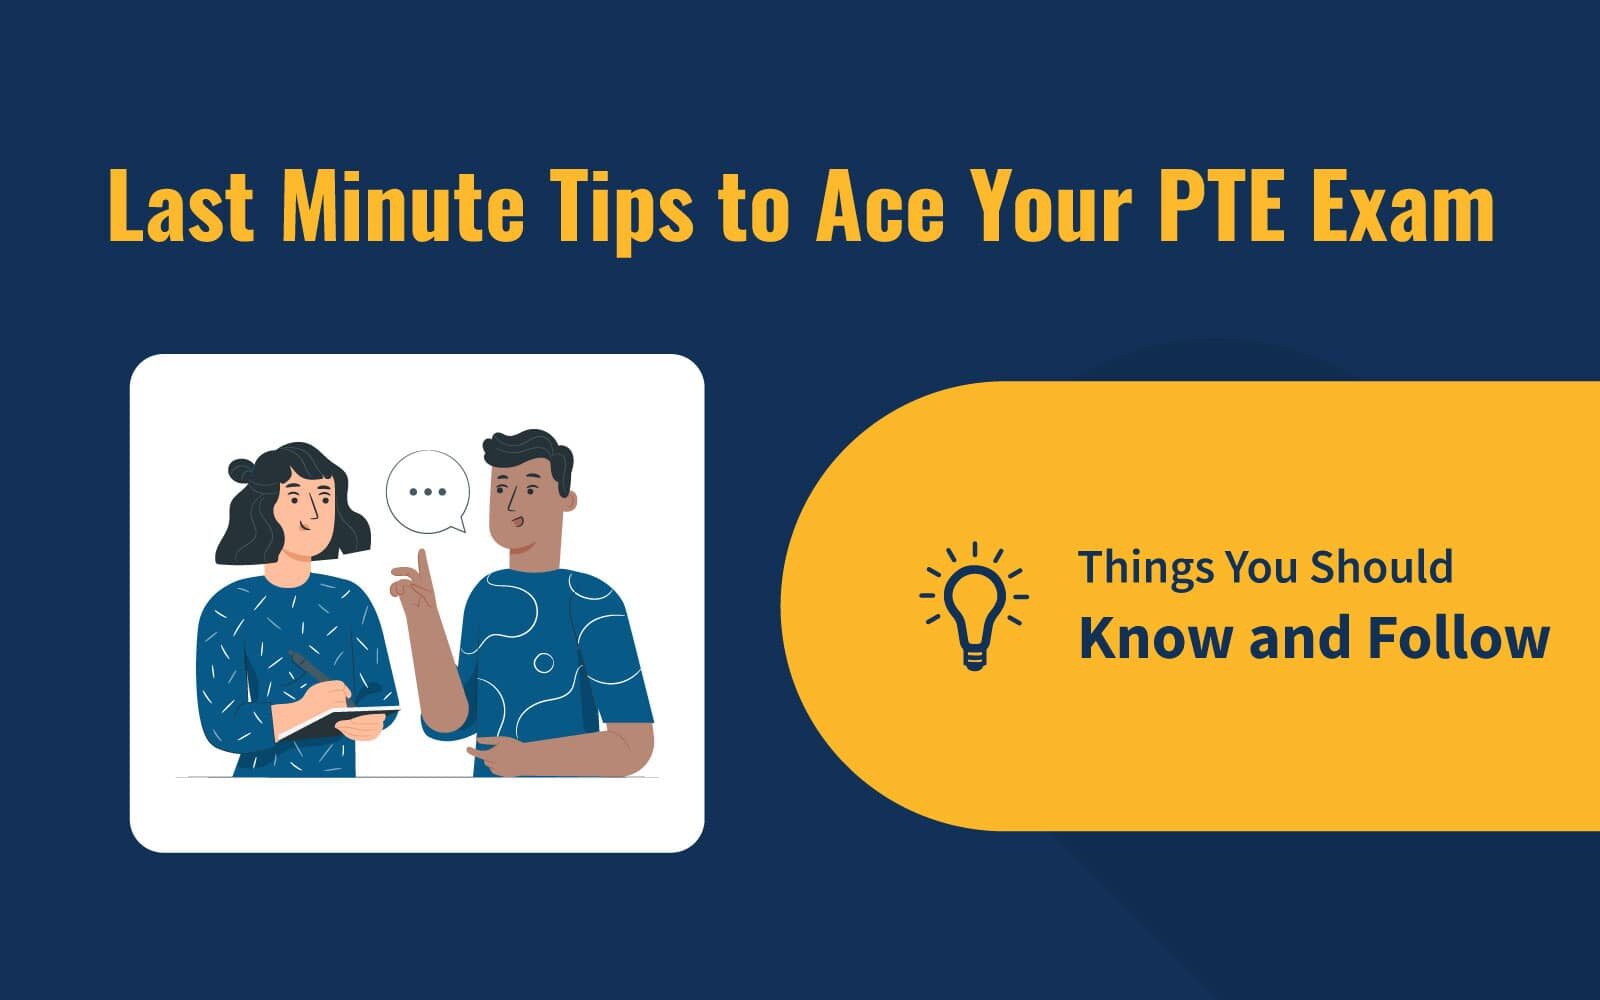 Last Minute Tips to Ace Your PTE Exam